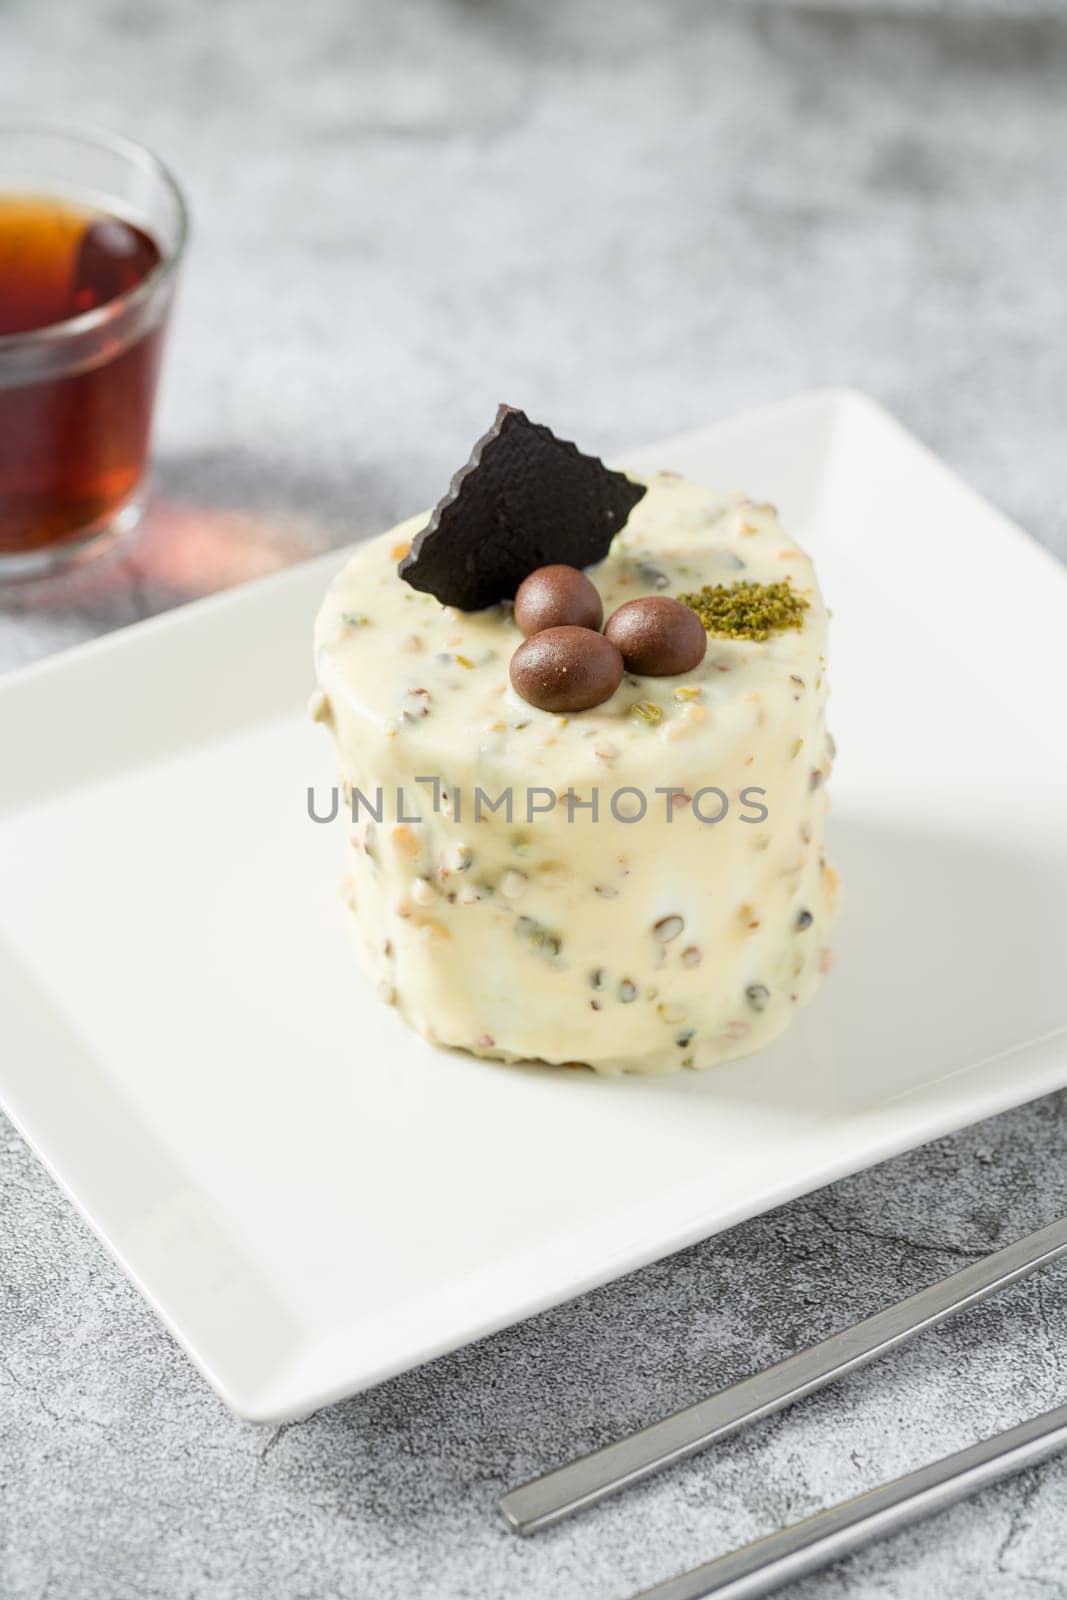 Single person mini cake with pistachio and white chocolate on a white porcelain plate by Sonat